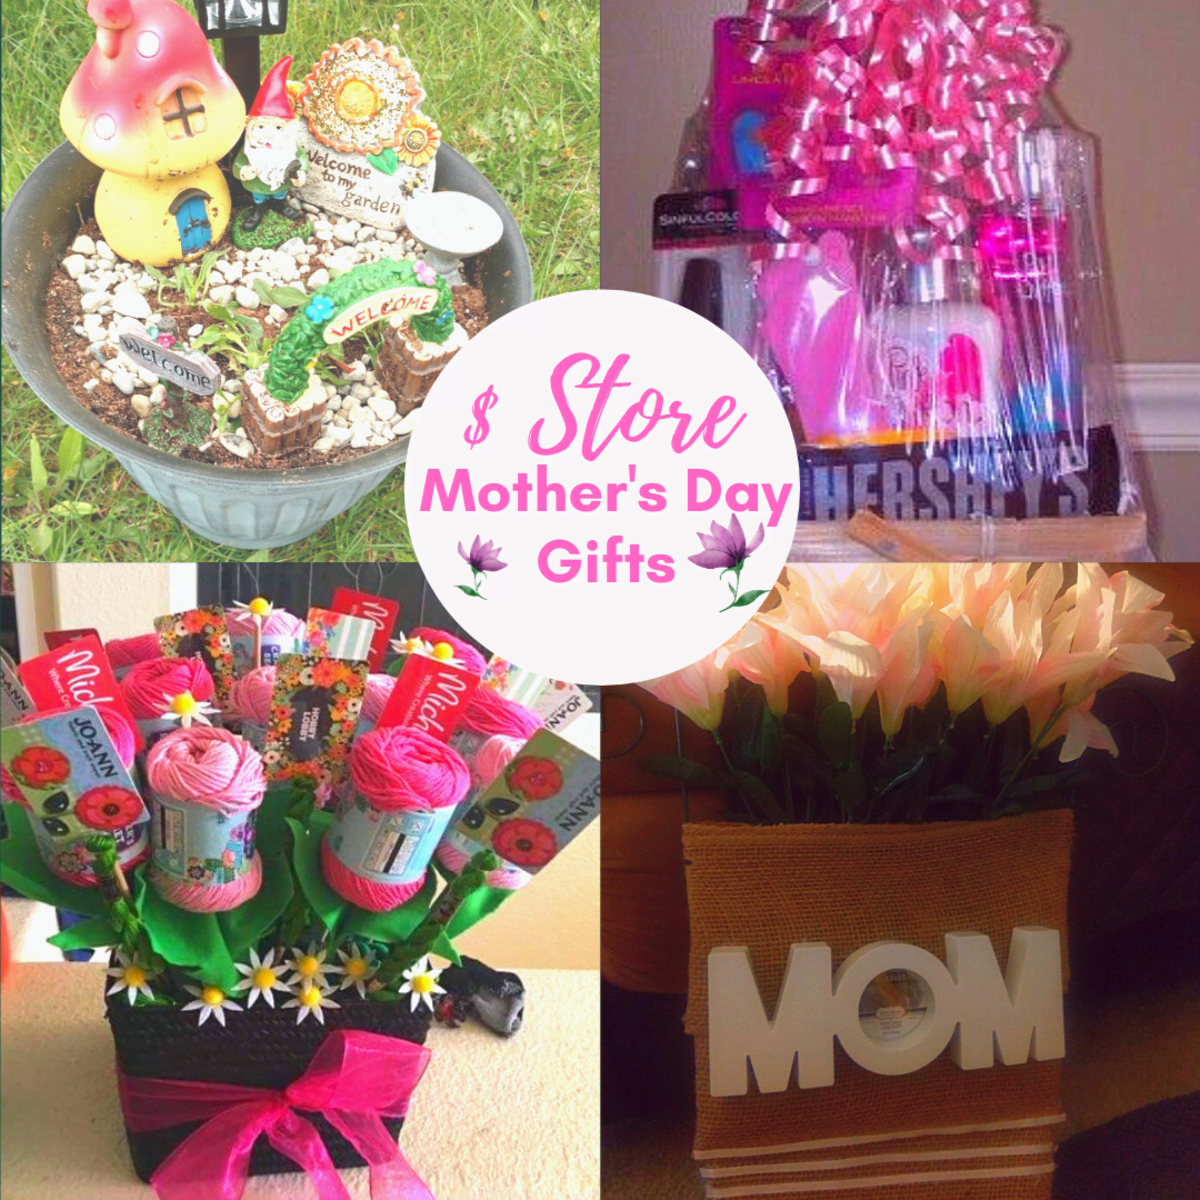 Dollar Tree Mothers Day Gift Ideas ~ UNDER $10 ~ Dollar Tree Budget Gifts  Mothers Day 